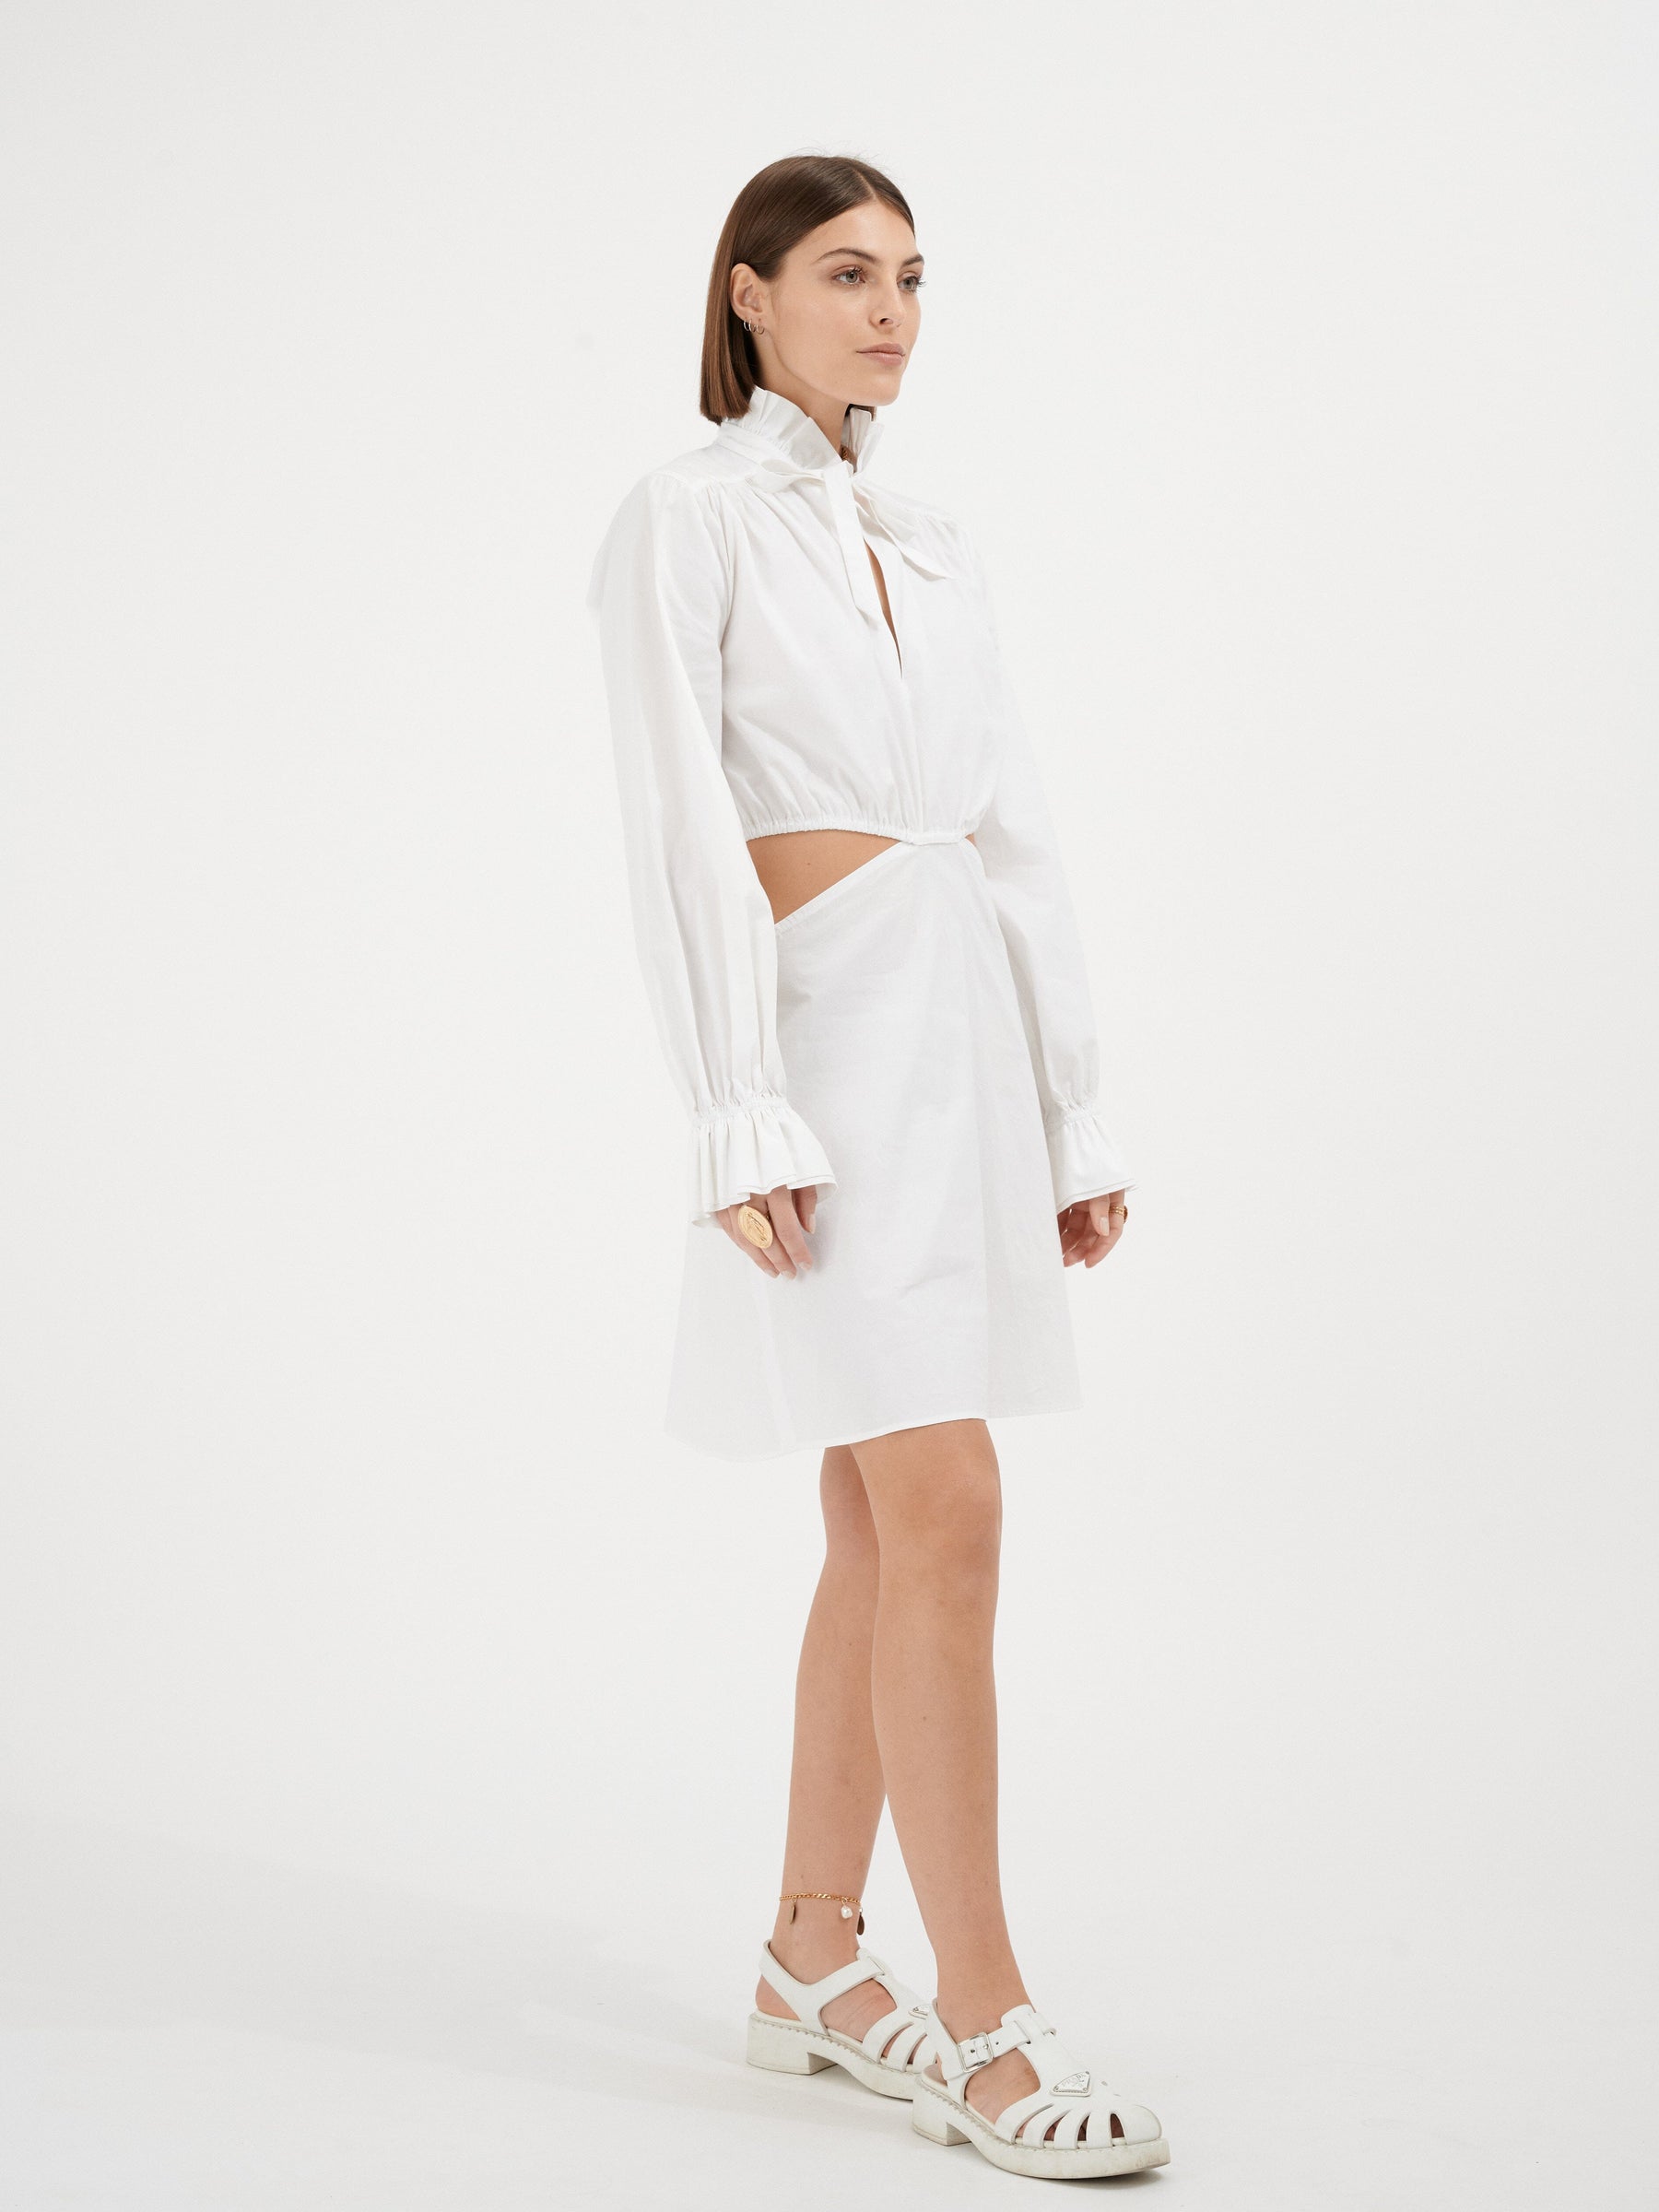 MATTEA - Short openwork dress with ruffled collar and long sleeves Cotton white Dress Fête Impériale